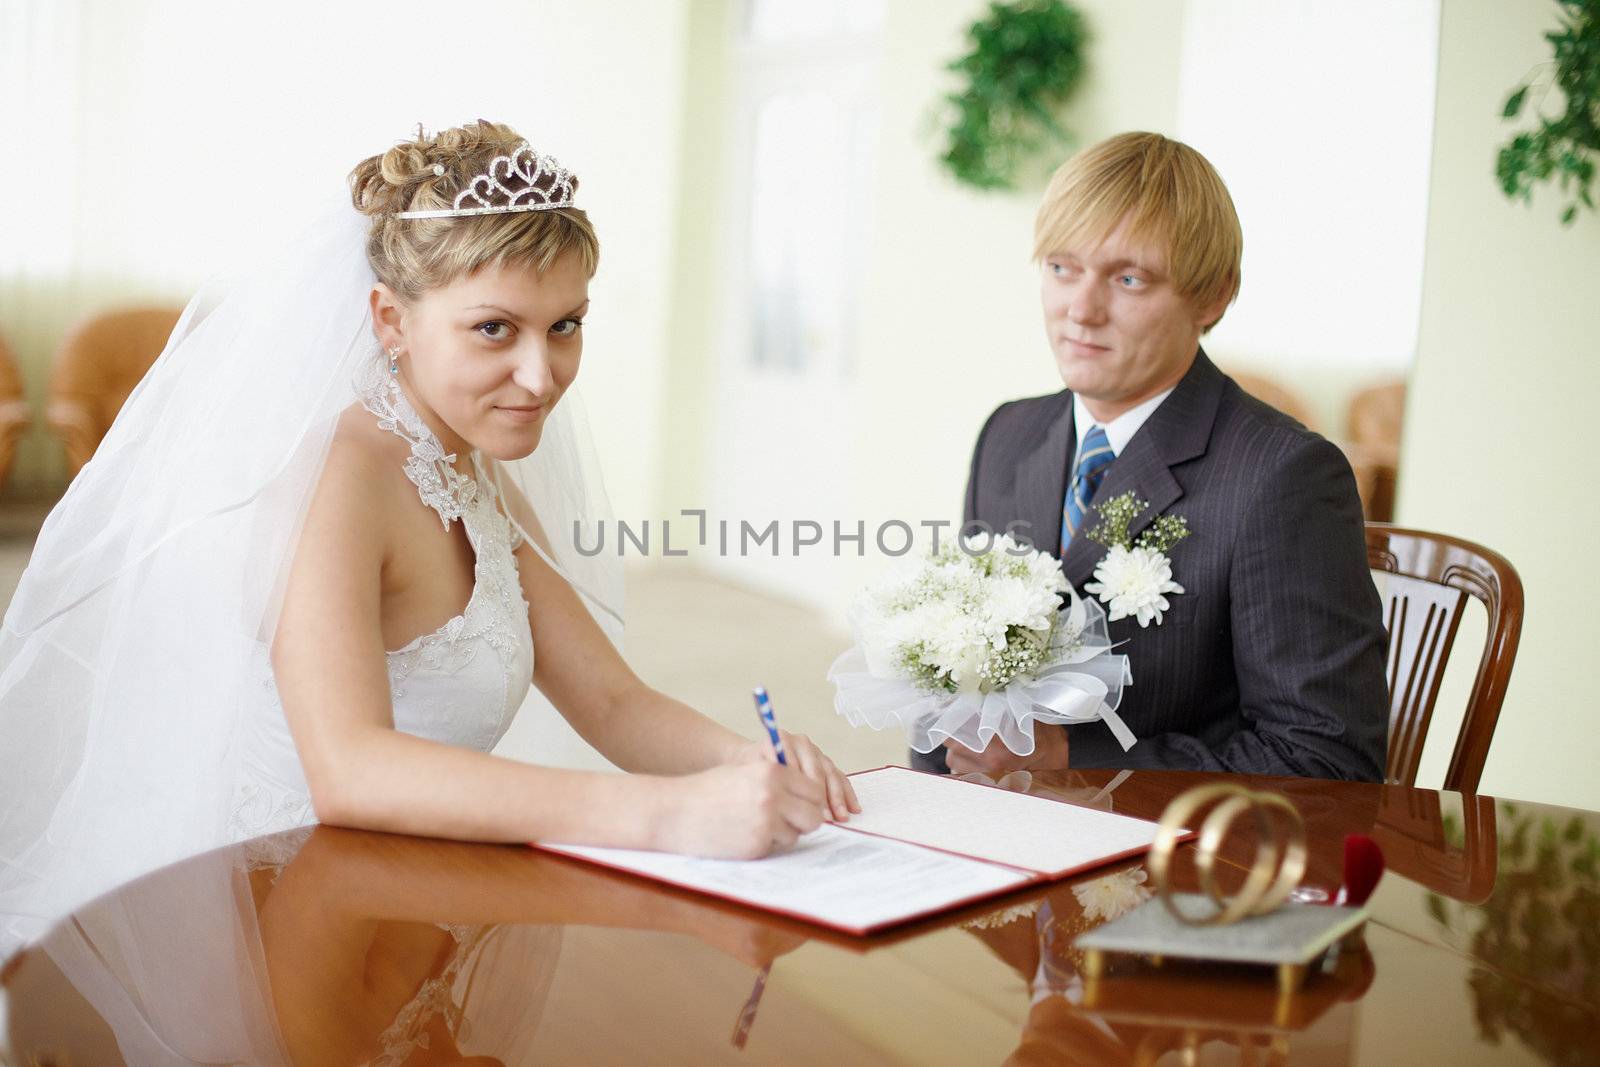 Marriage registration by pzaxe